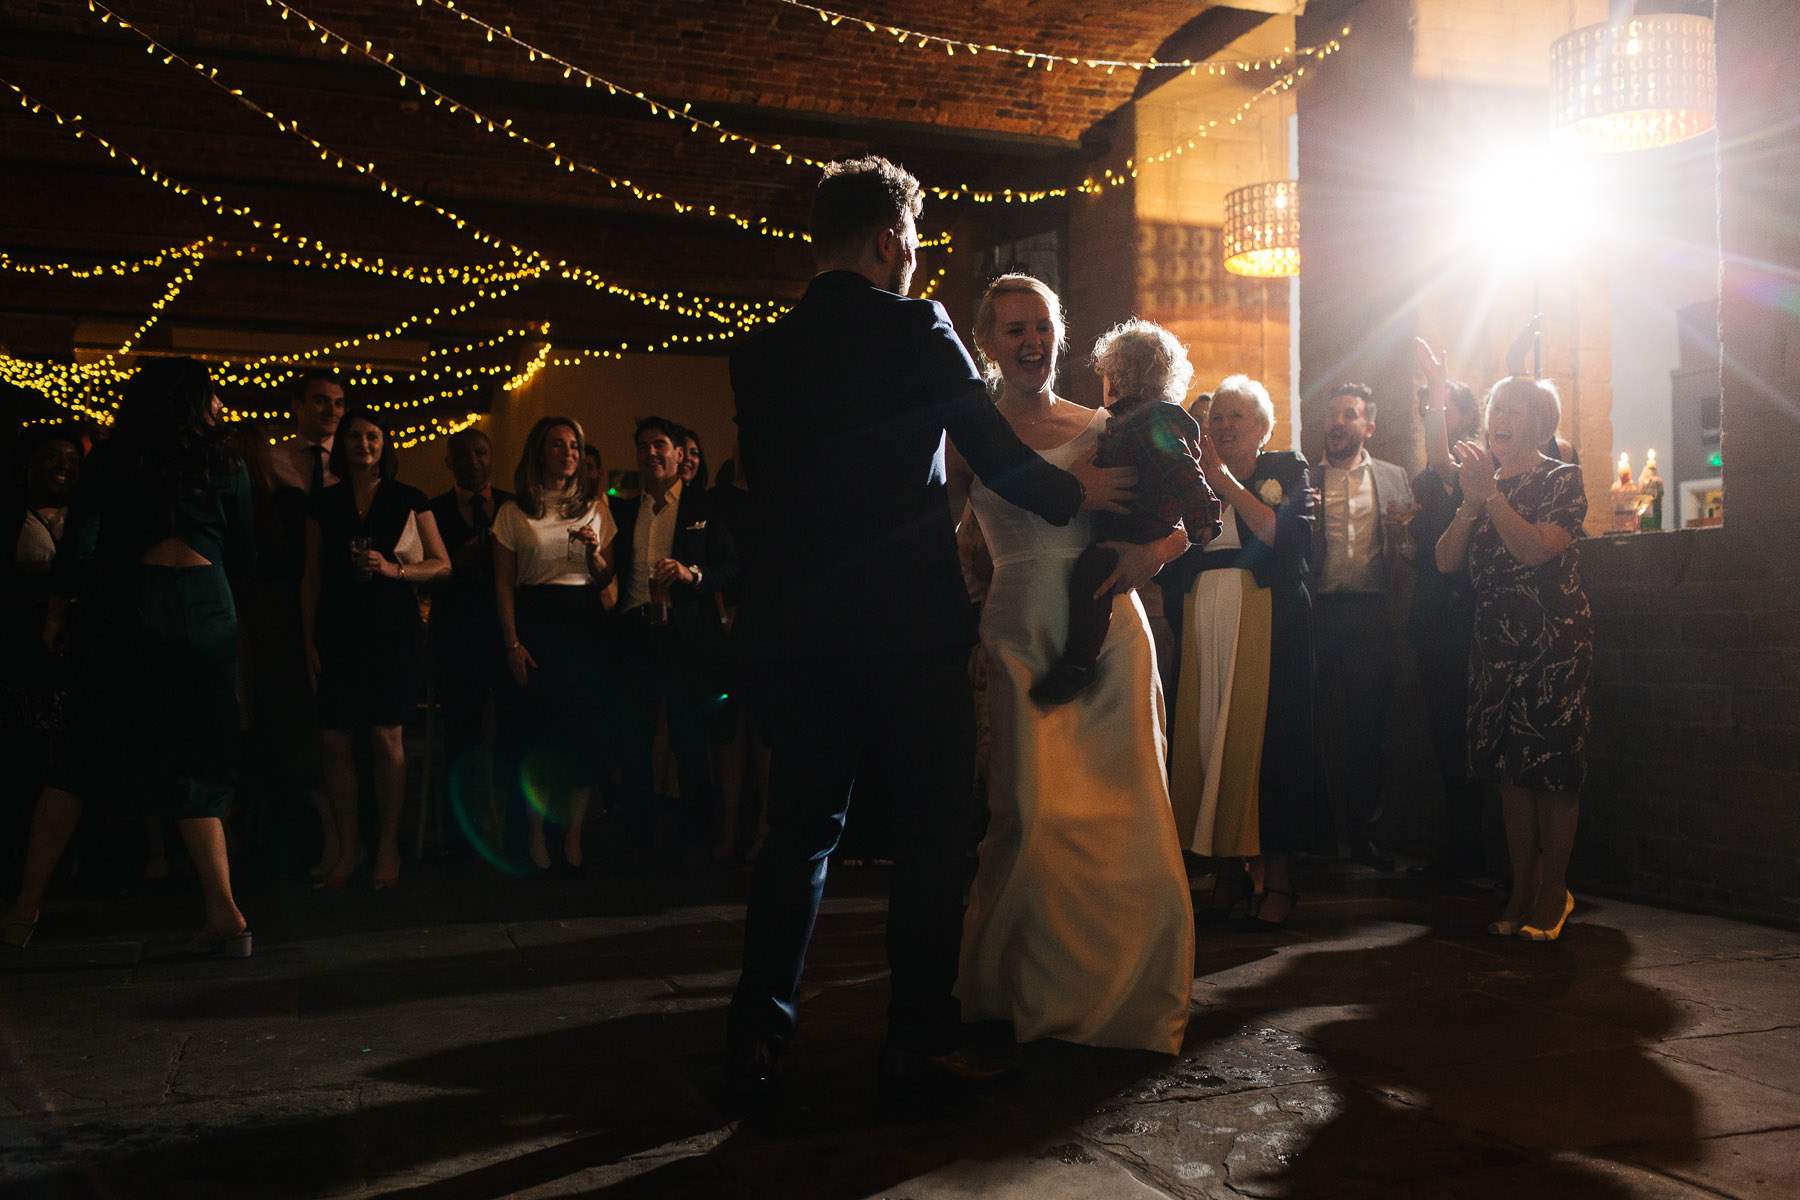 Laura + Dave's Industrial Wedding at The Arches in Dean Clough Mills in Halifax www.pauljosephphotography.co.uk 